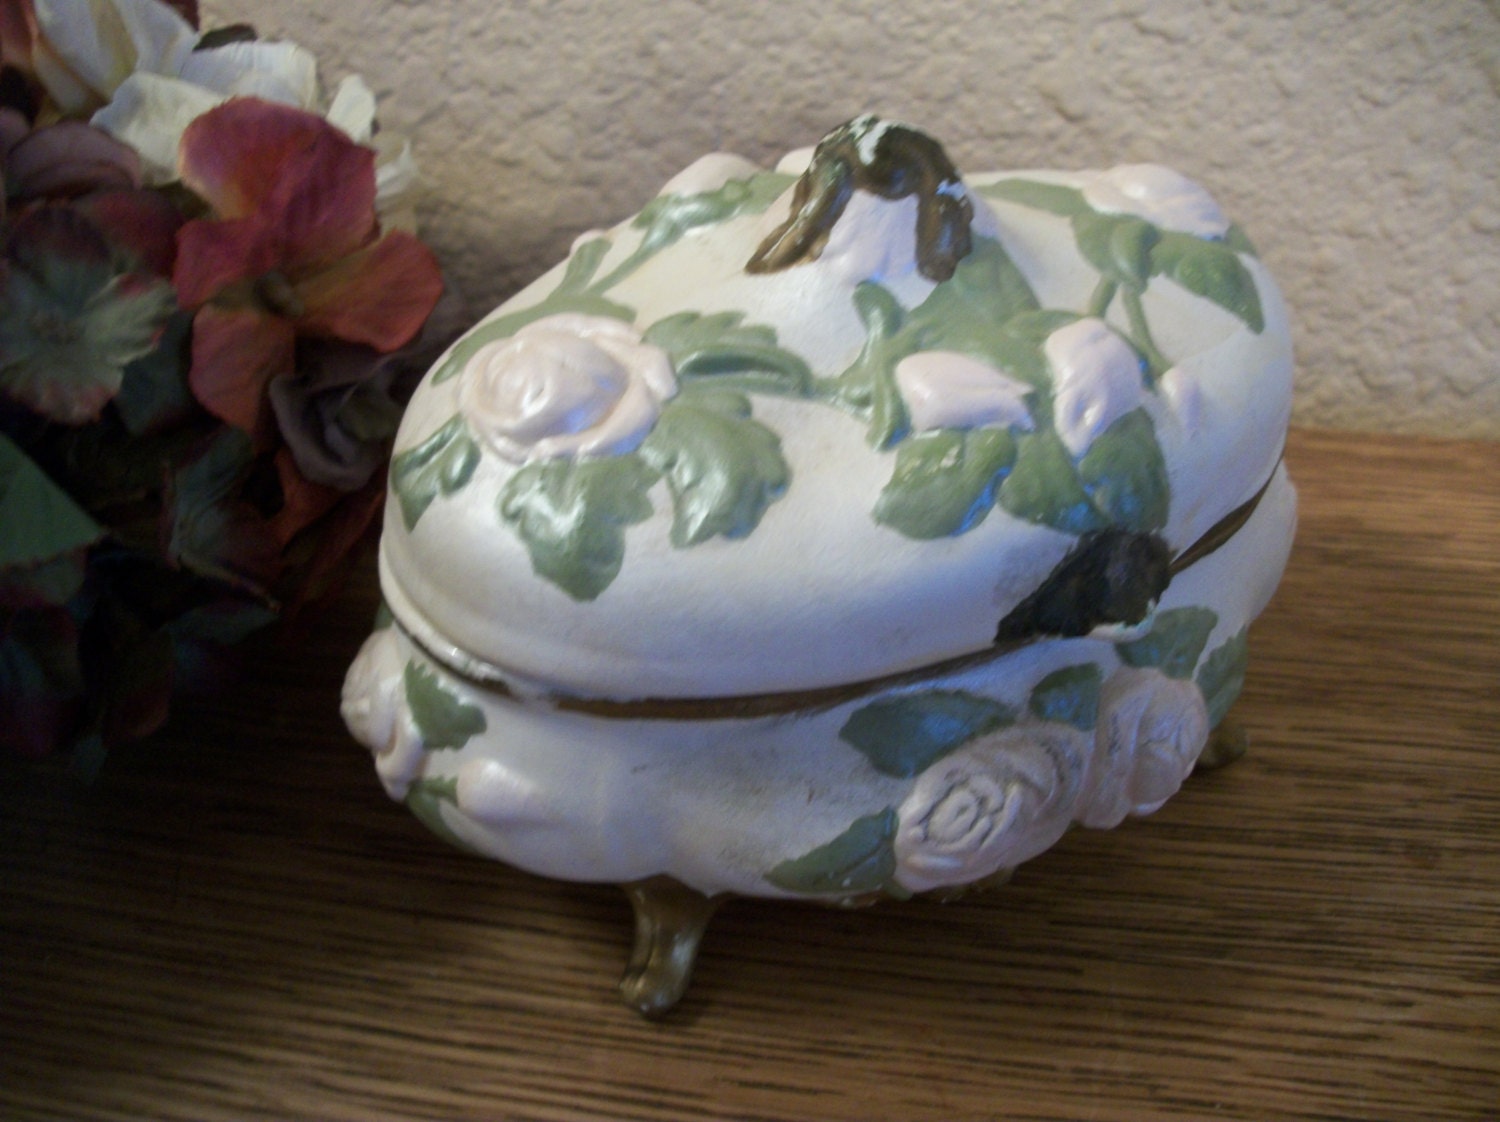 Dresser Top Jewelry Box White Ceramic with  Pink Roses and Green Leaves Gold Trim Shabby Cottage Vintage 1960's Handcrafted Trinket Dish - SpringJewelryThings